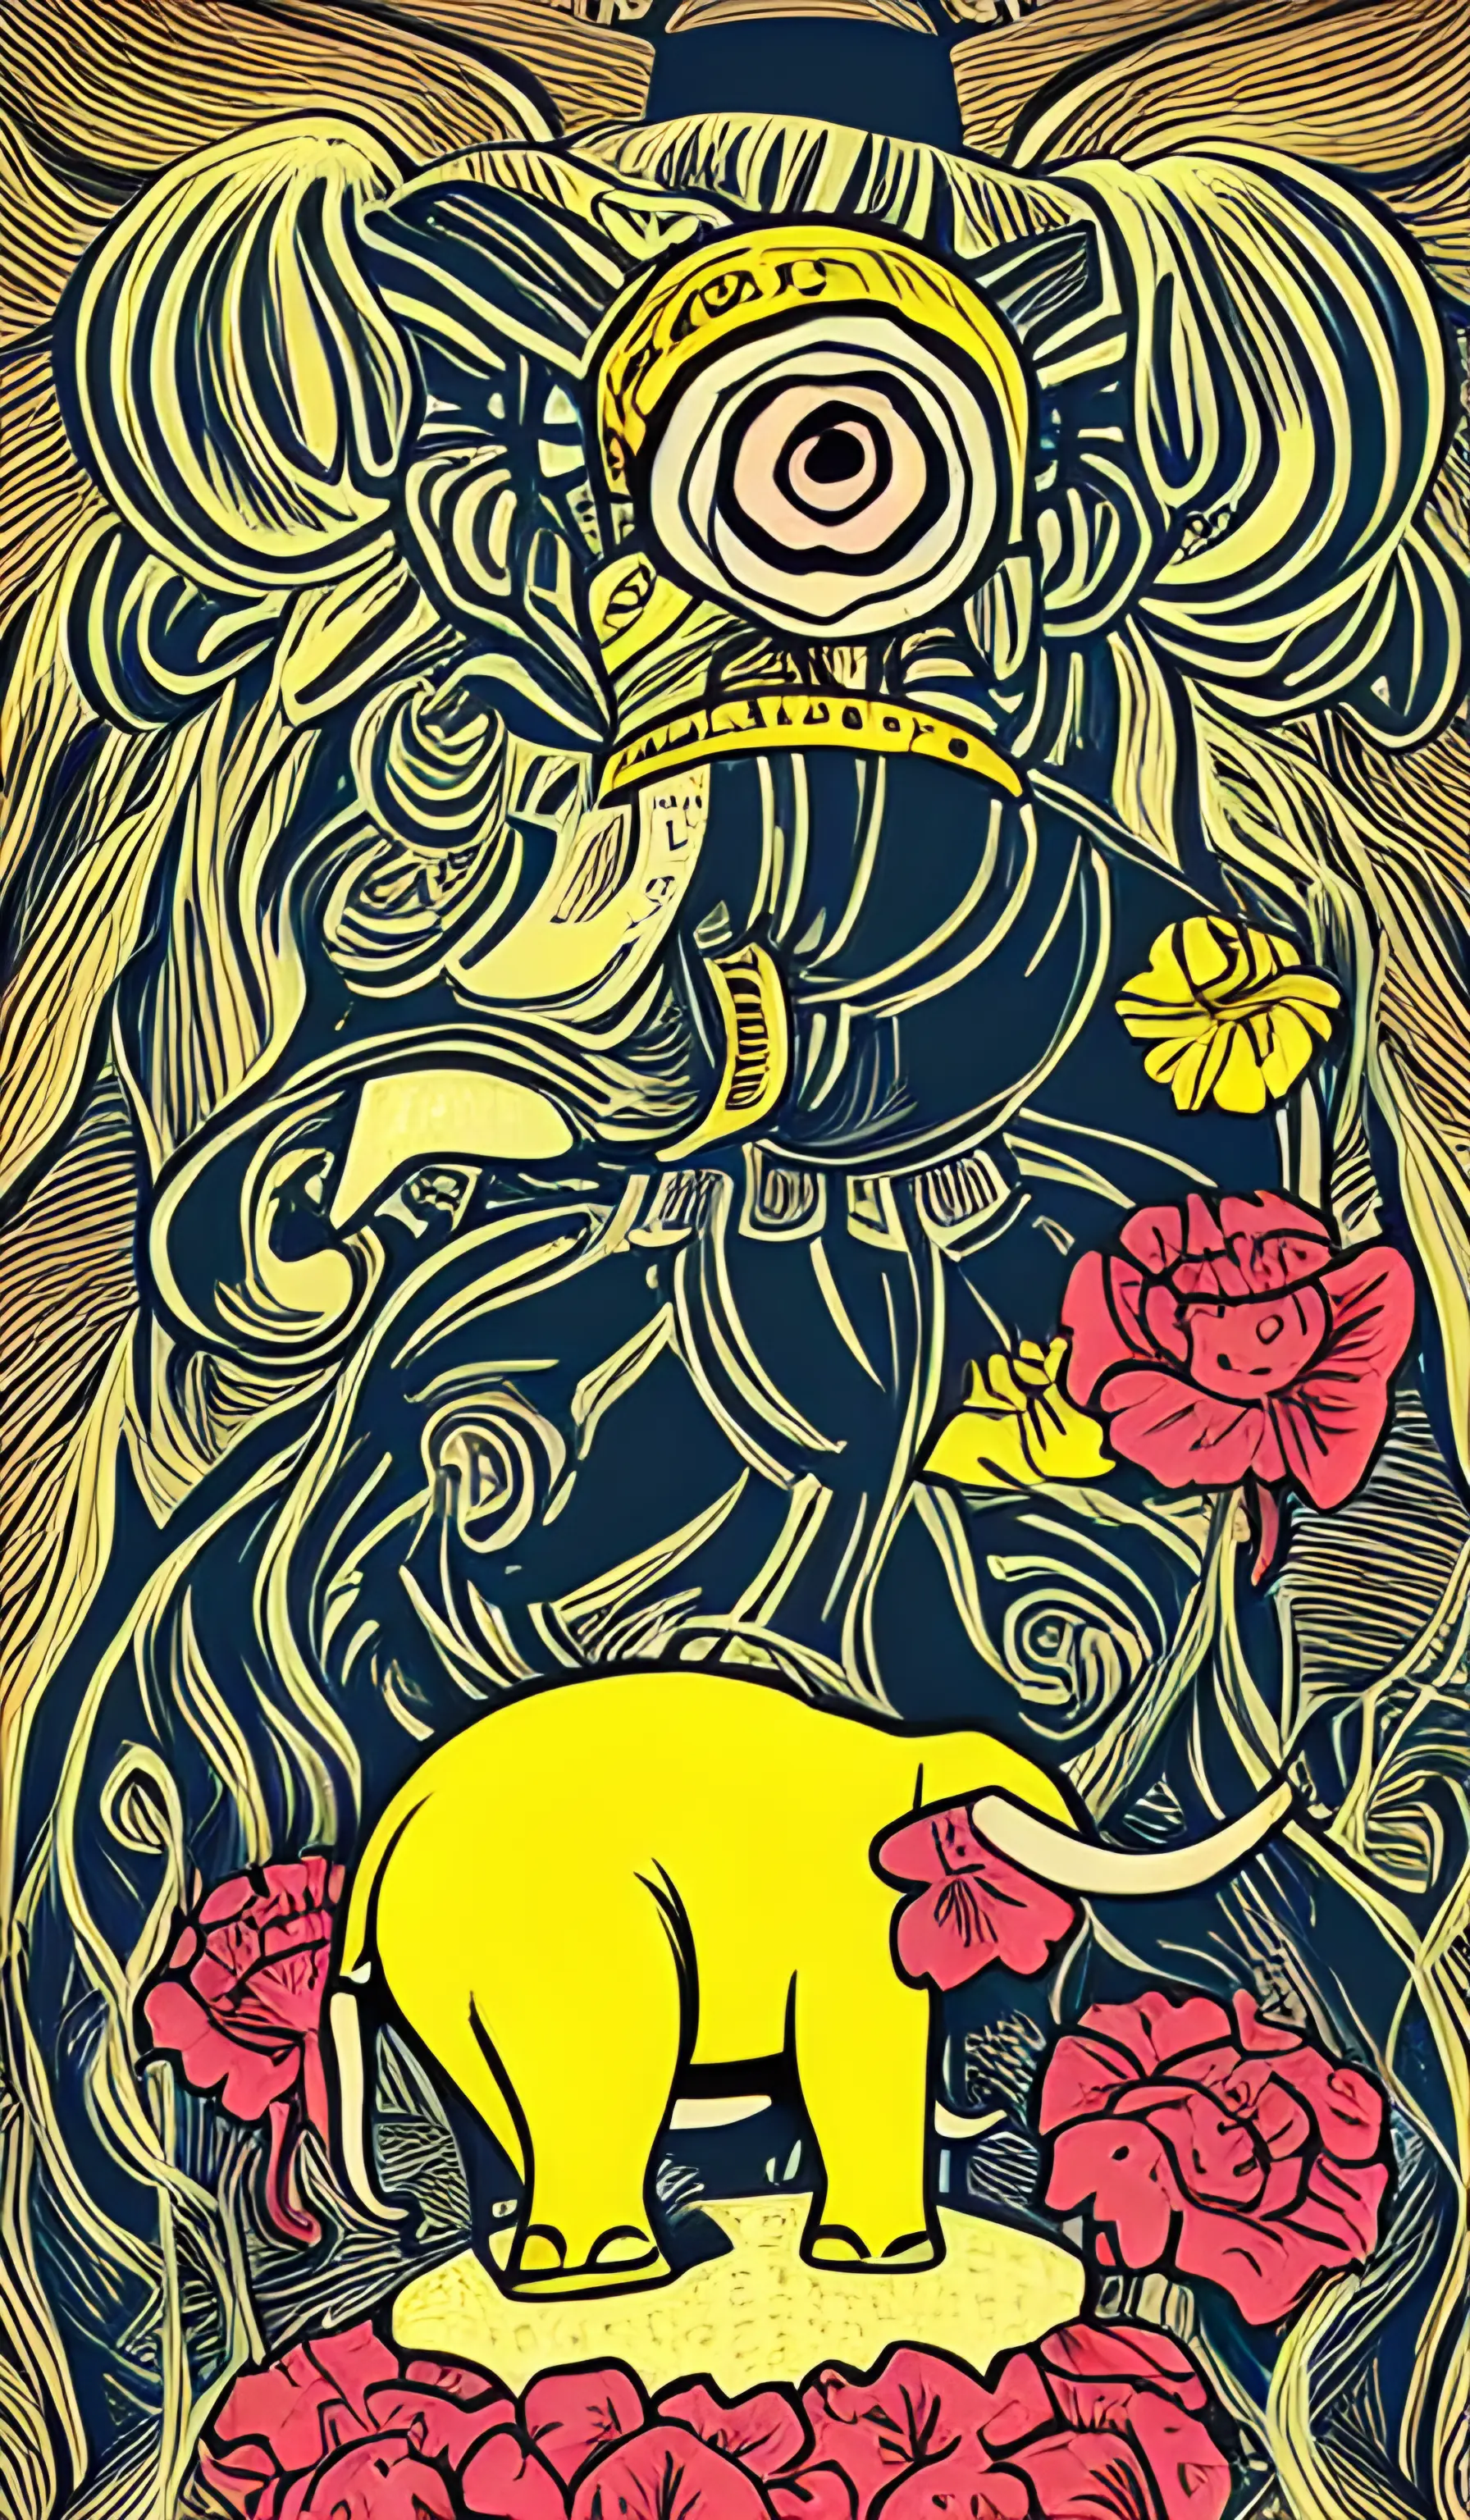 jjkkcolorful!!!!!!!, mcbess poster , baby elephant saving the earth with a yellow carnation flower in its trunk